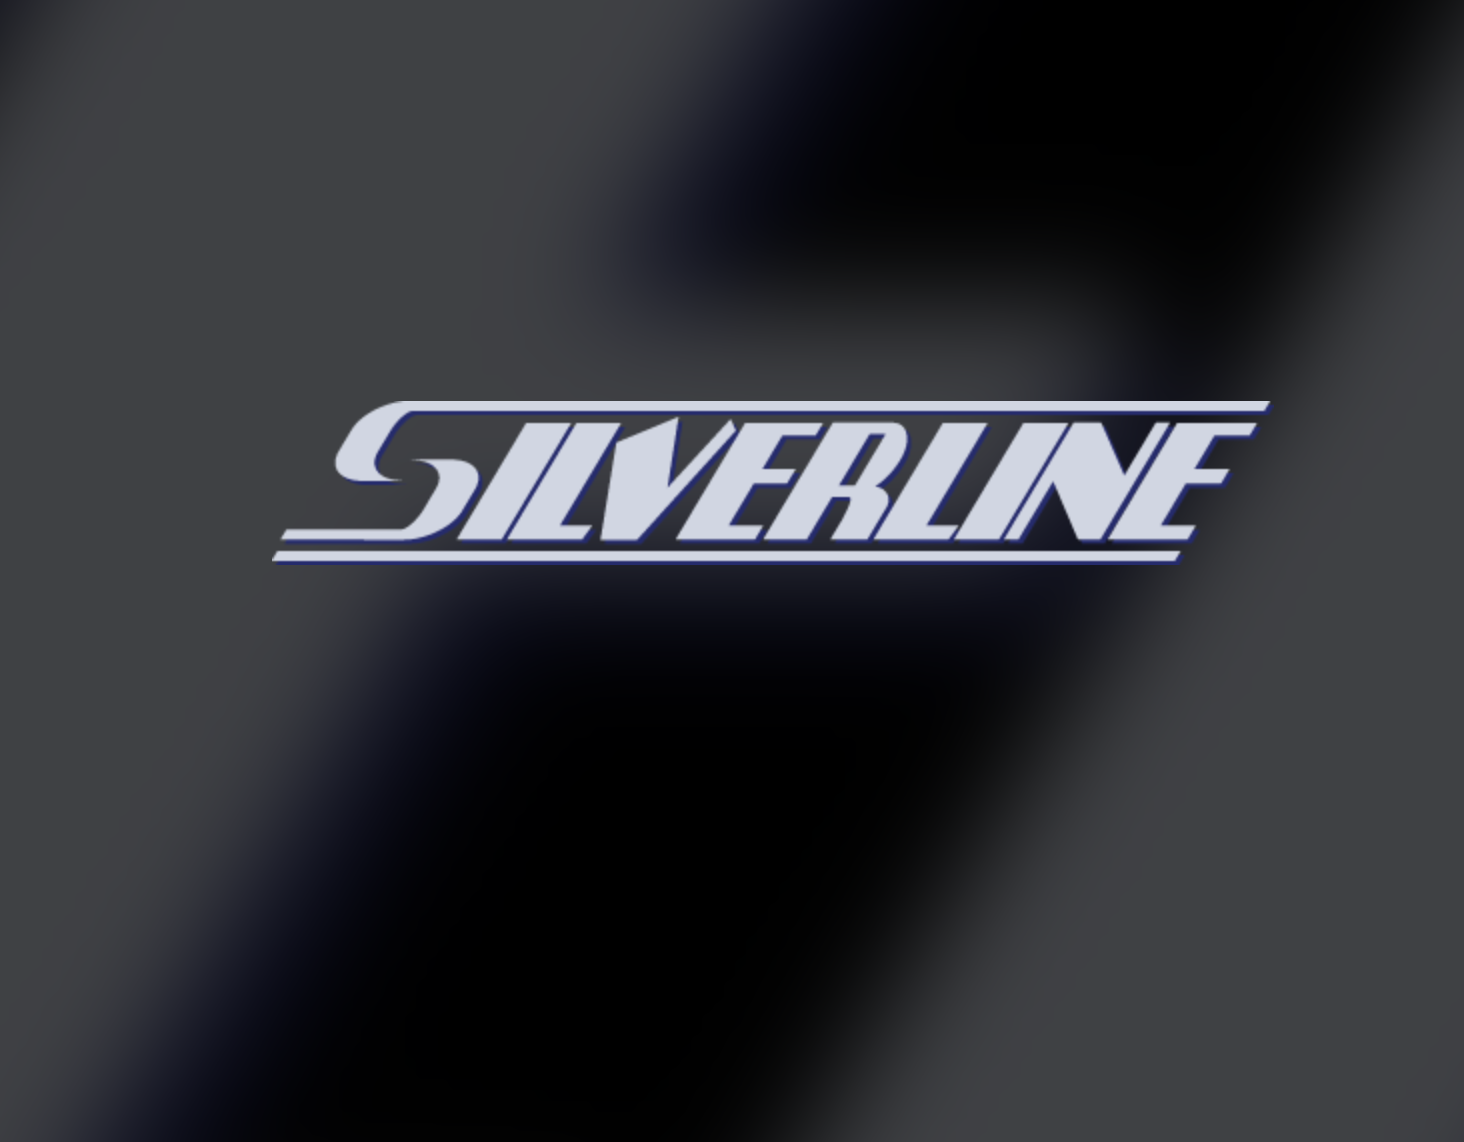 RON FORTIER DOES NEW SCI-FI EPIC FOR SILVERLINE COMICS 				 			 		 	 -off the COMiXNEWSWiRE.com.